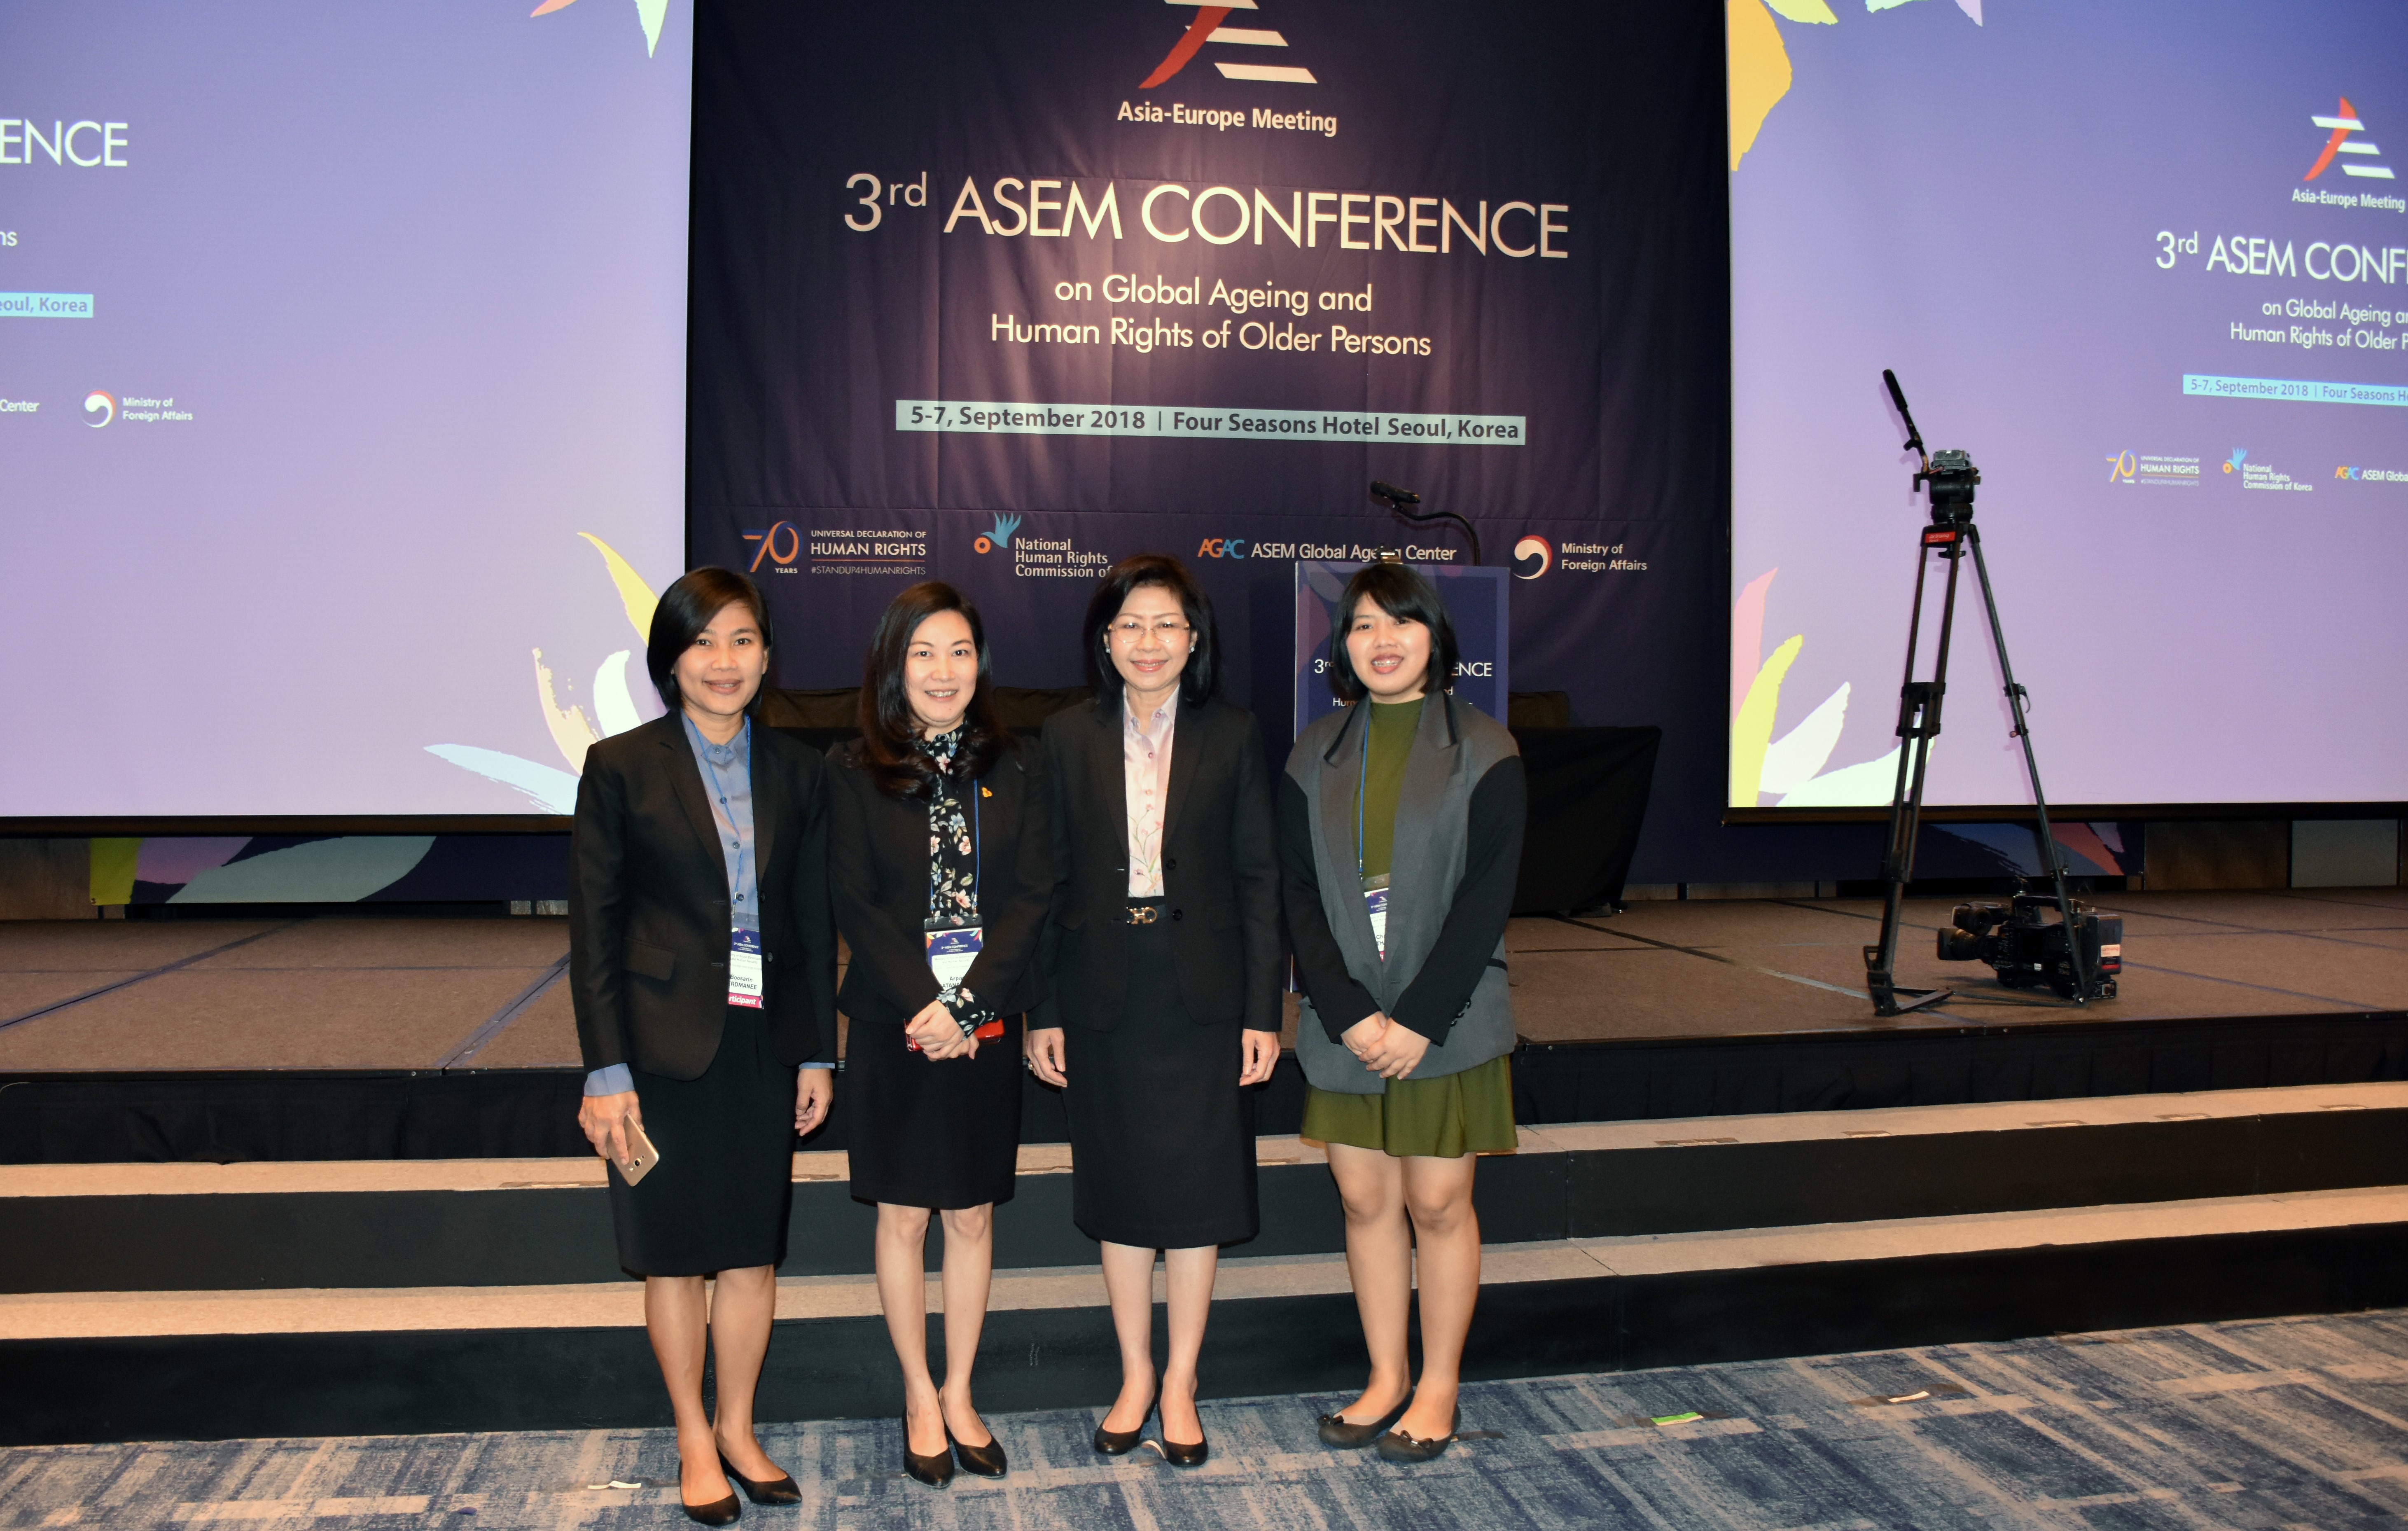 3rd ASEM Conference on Global Ageing and Human Rights of Older Persons